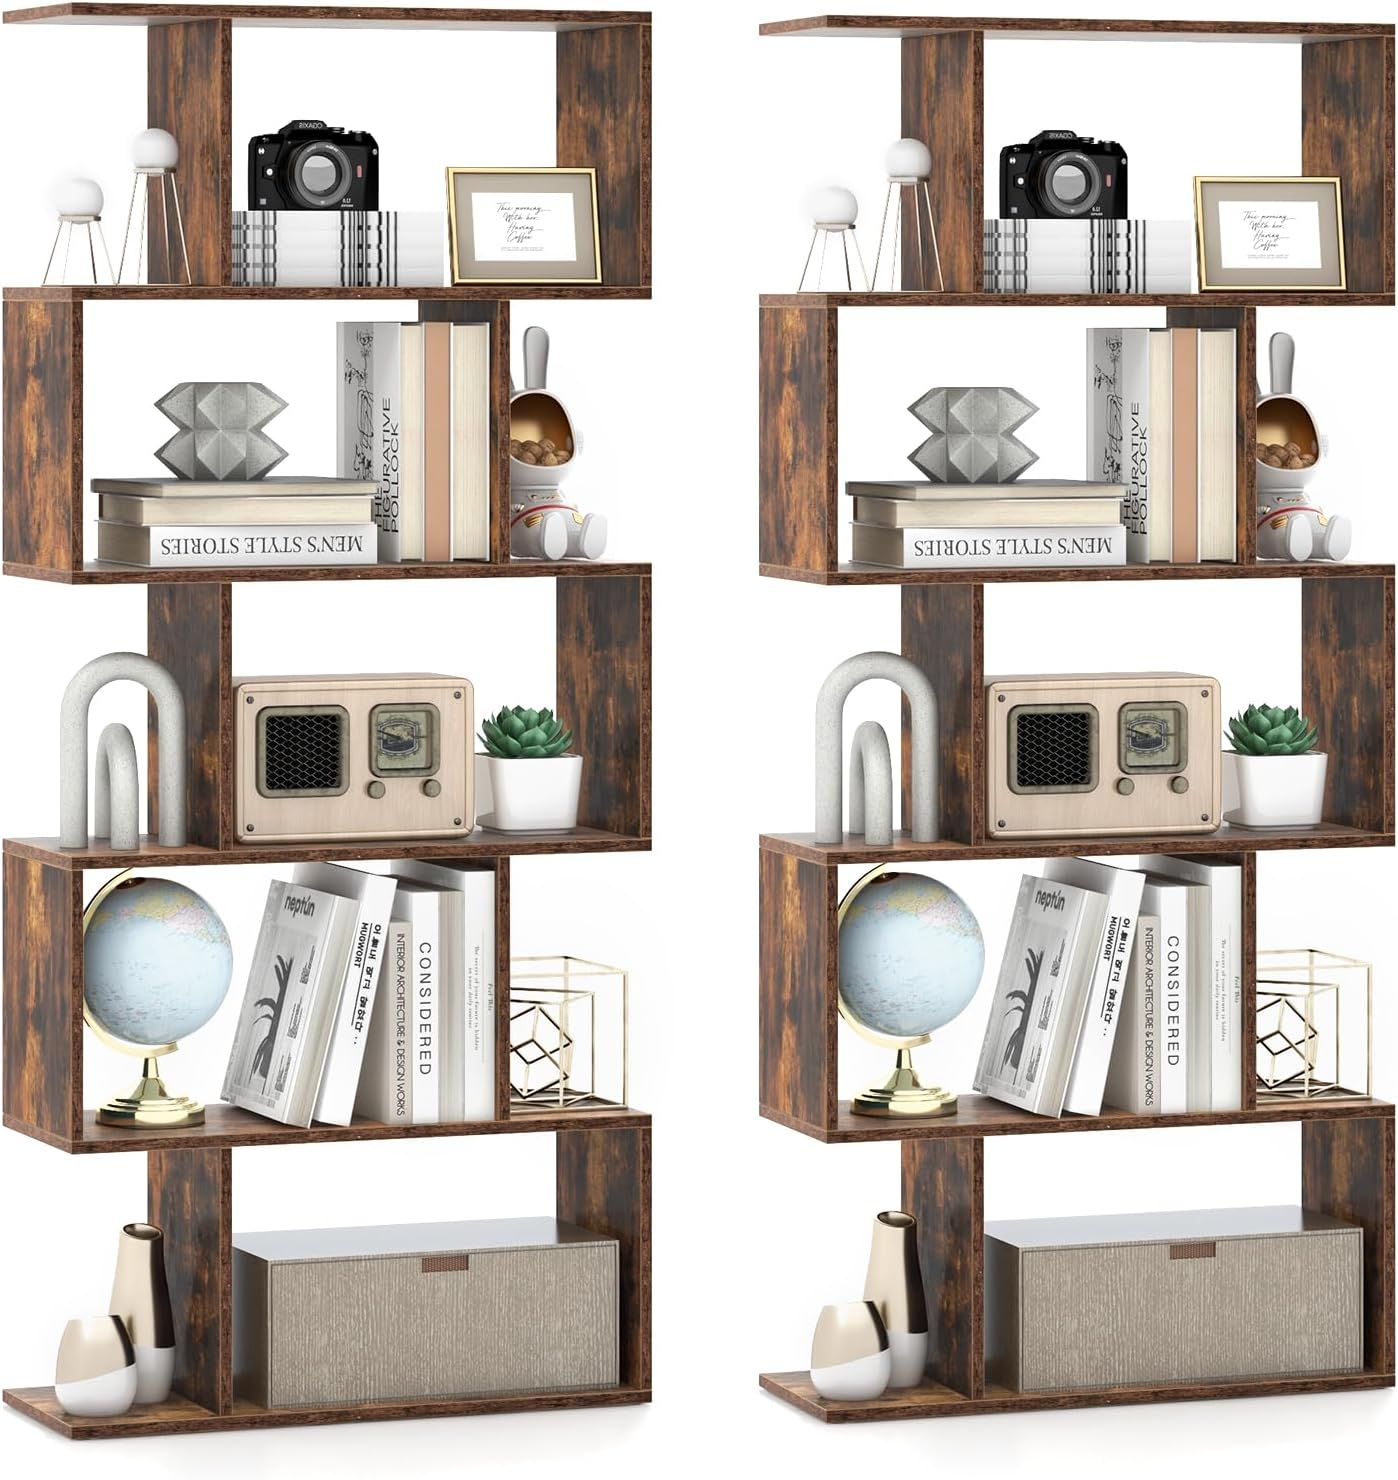 Giantex 5-Tier Geometric Bookshelf, 62.5" Tall Wood S-Shaped Bookcase with Anti-Tipping Device